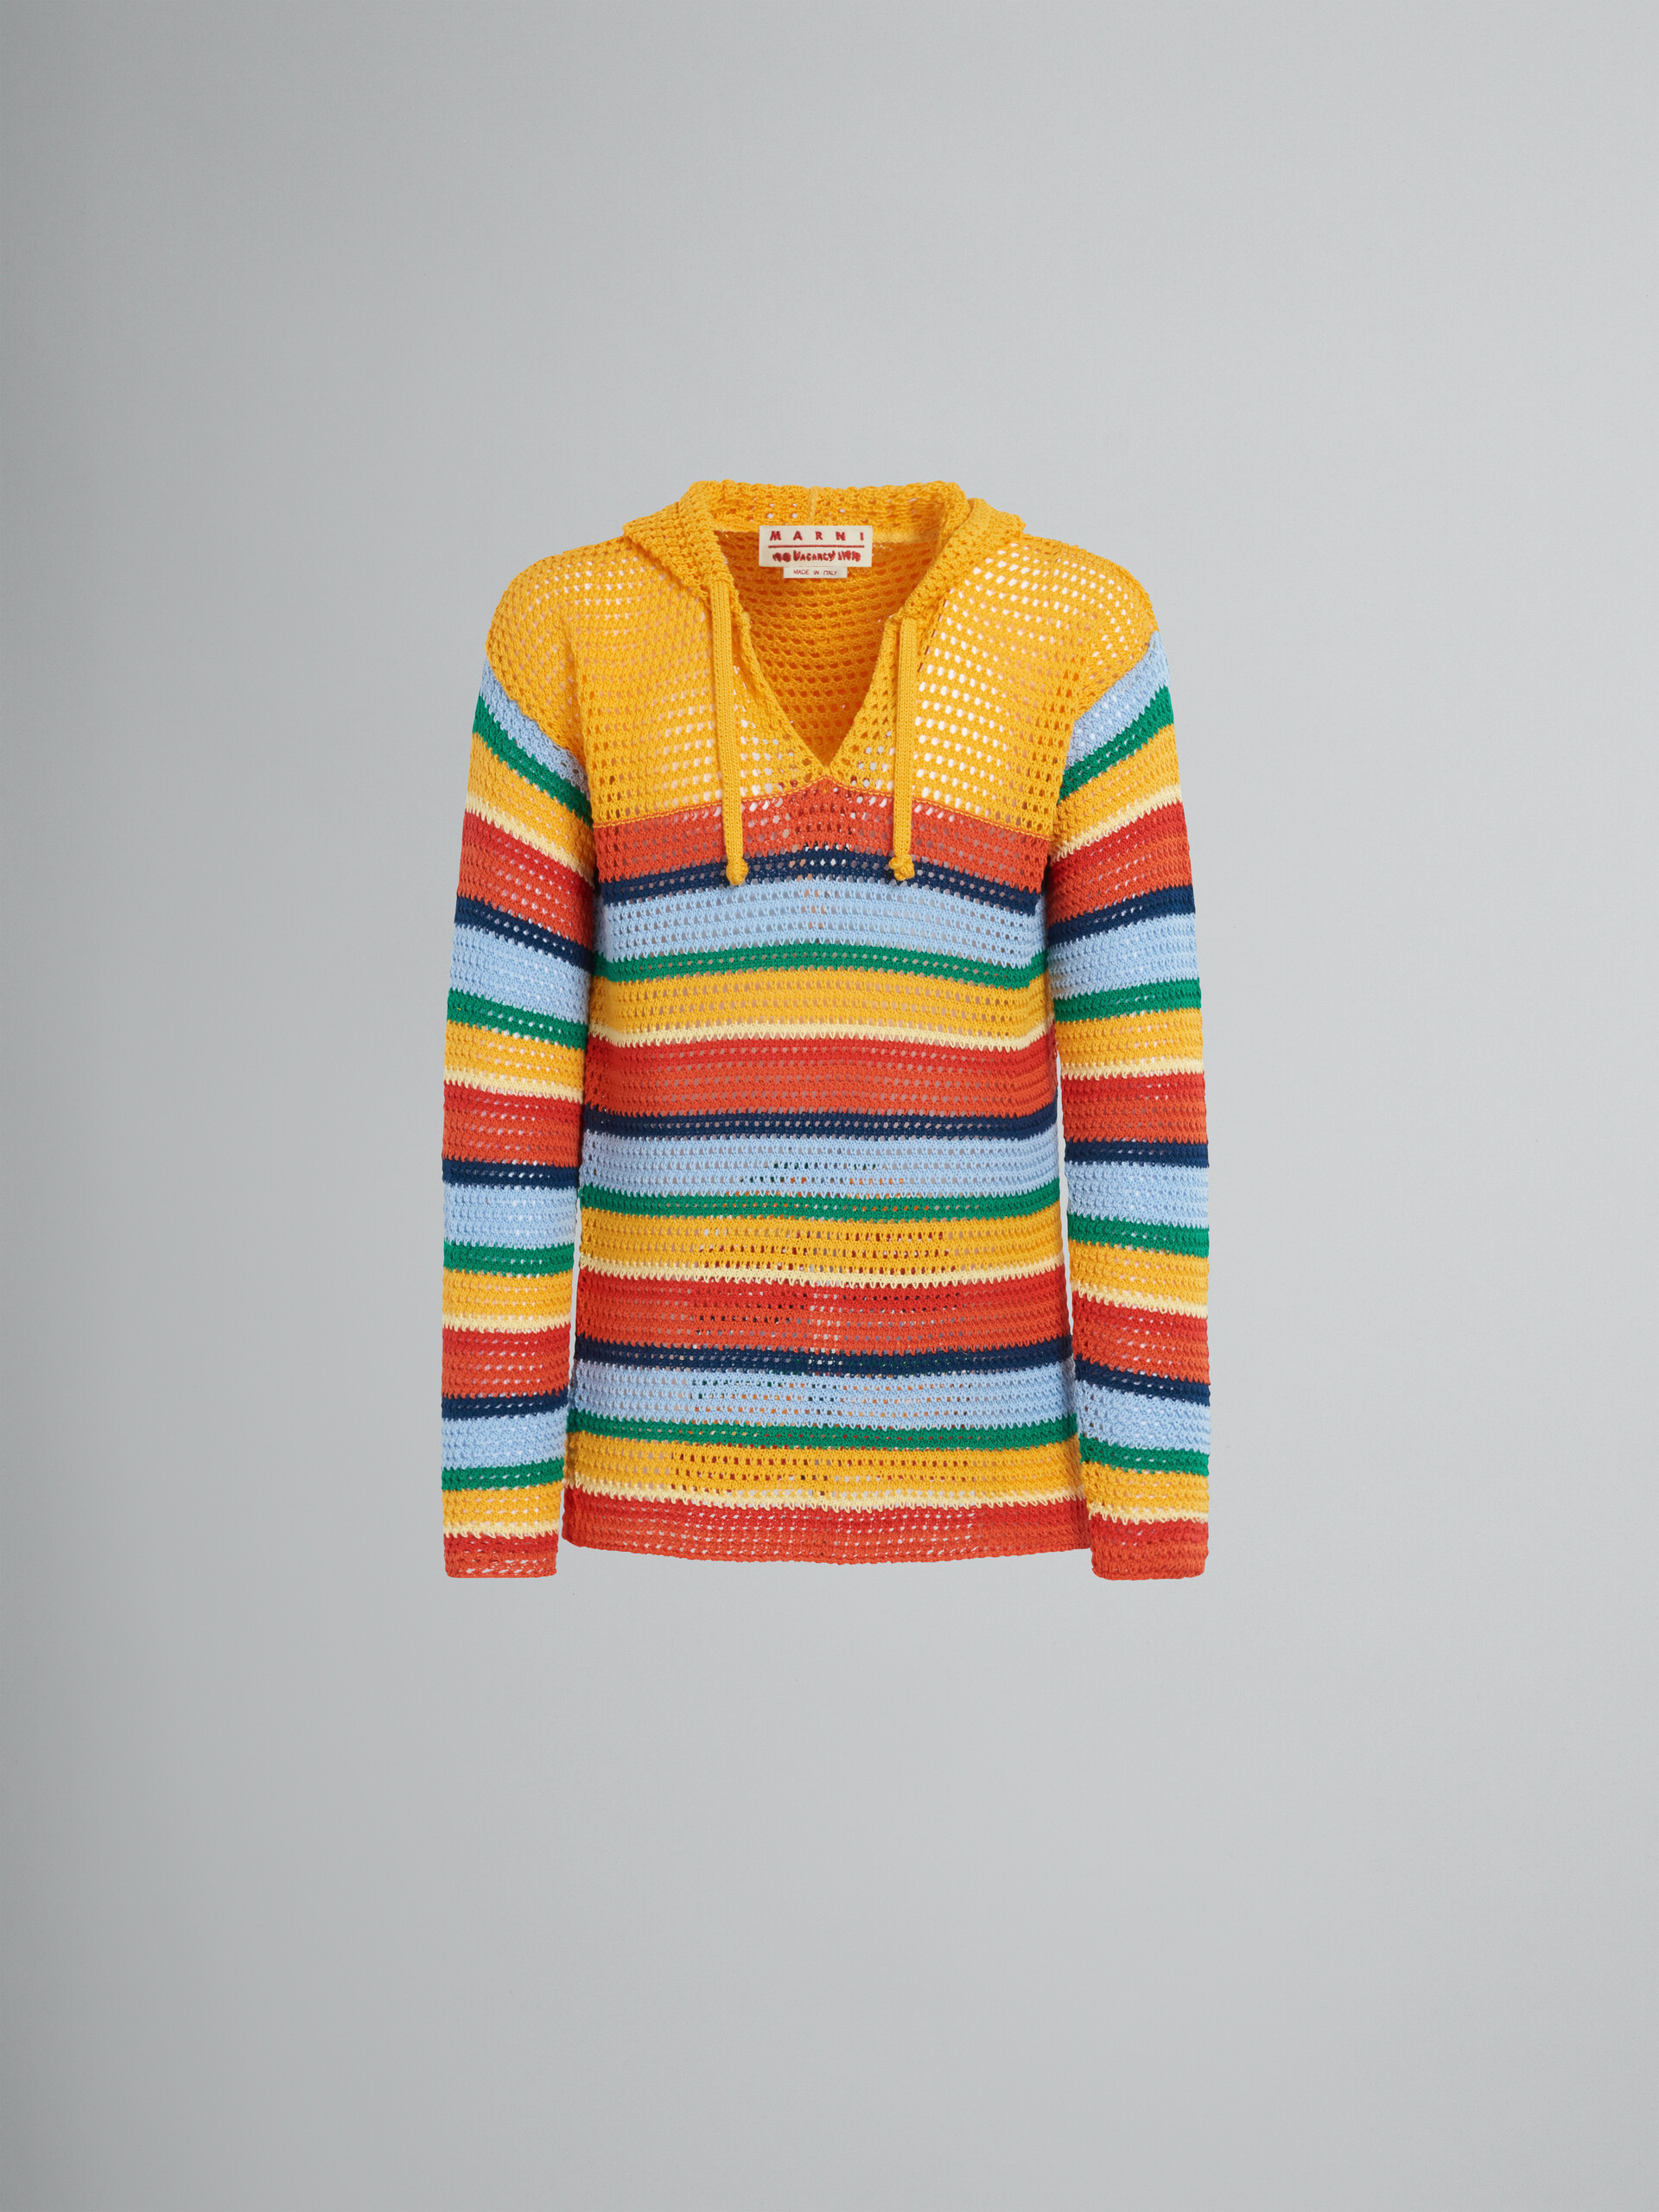 Marni x No Vacancy Inn - Multicolour cotton-knit hoodie - Pullovers - Image 1